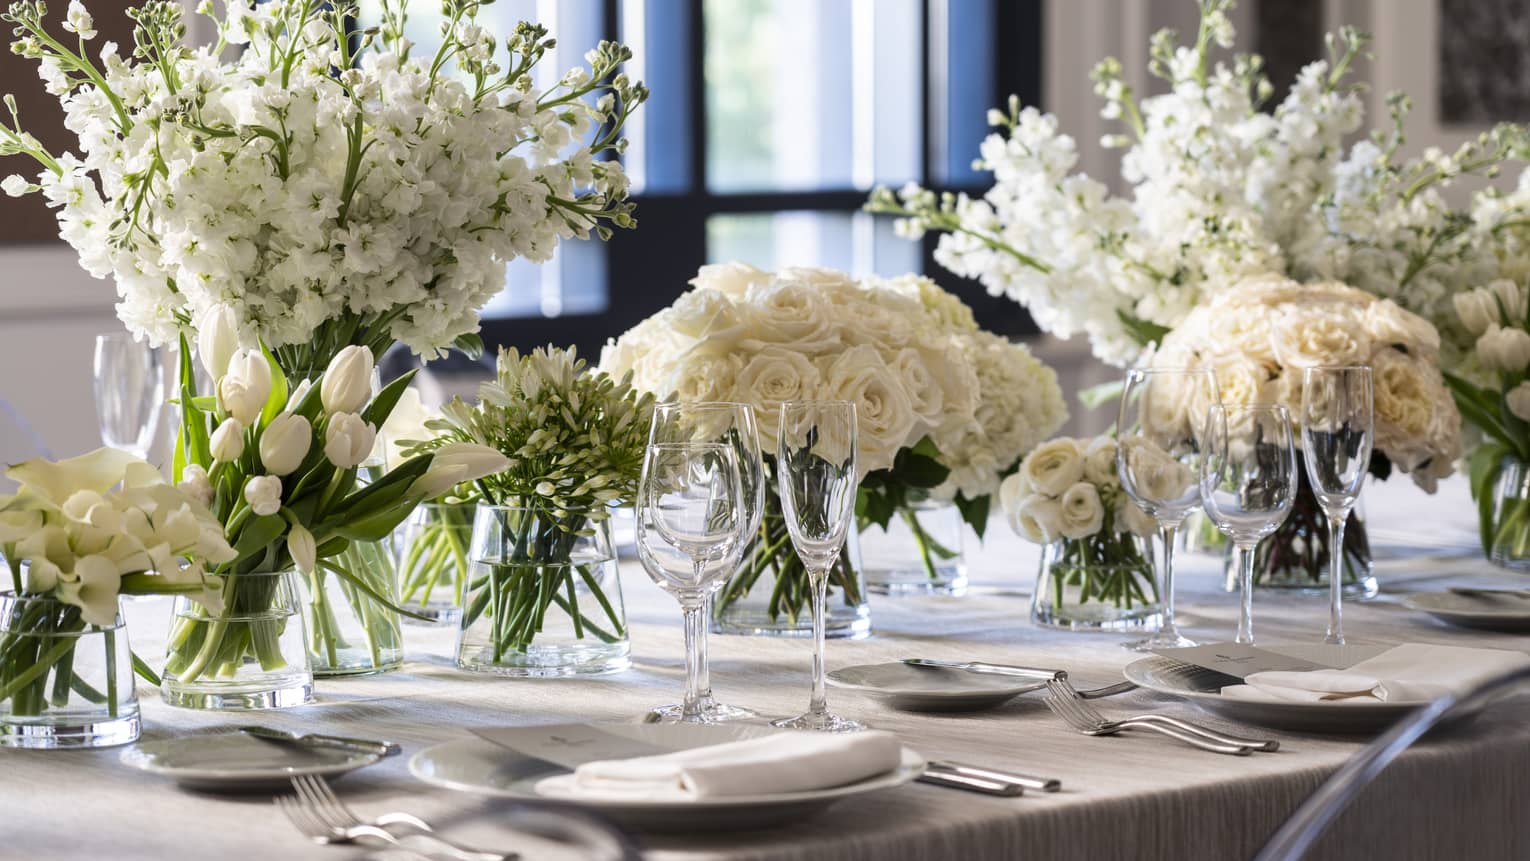 A grey table with an assortment of white flowers in a row, along with white plates and wine glasses.